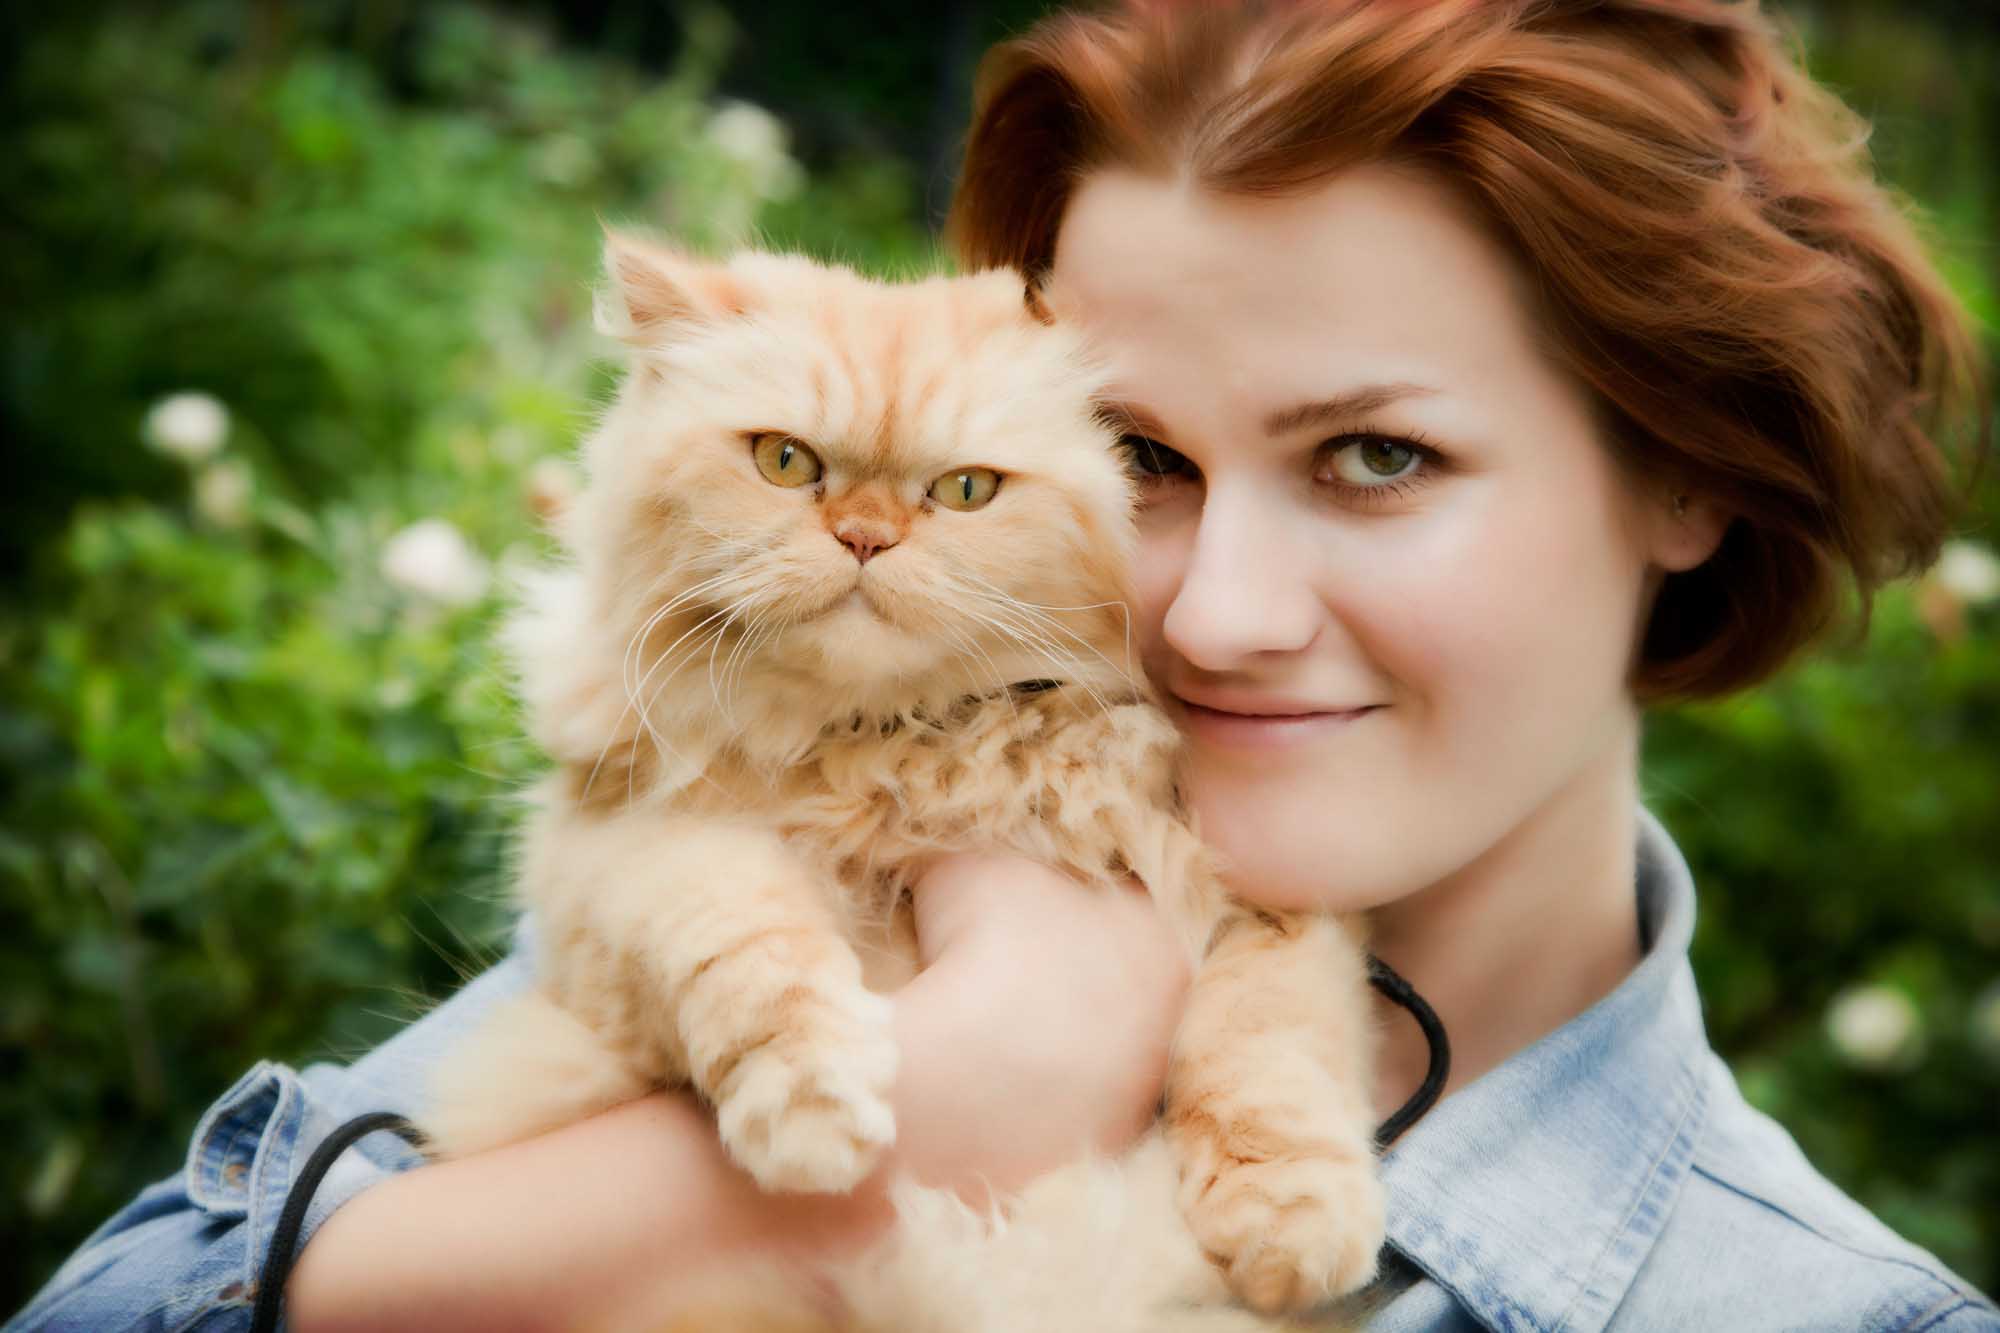 Friendliest Cat Breeds You’ll Want to Take Home